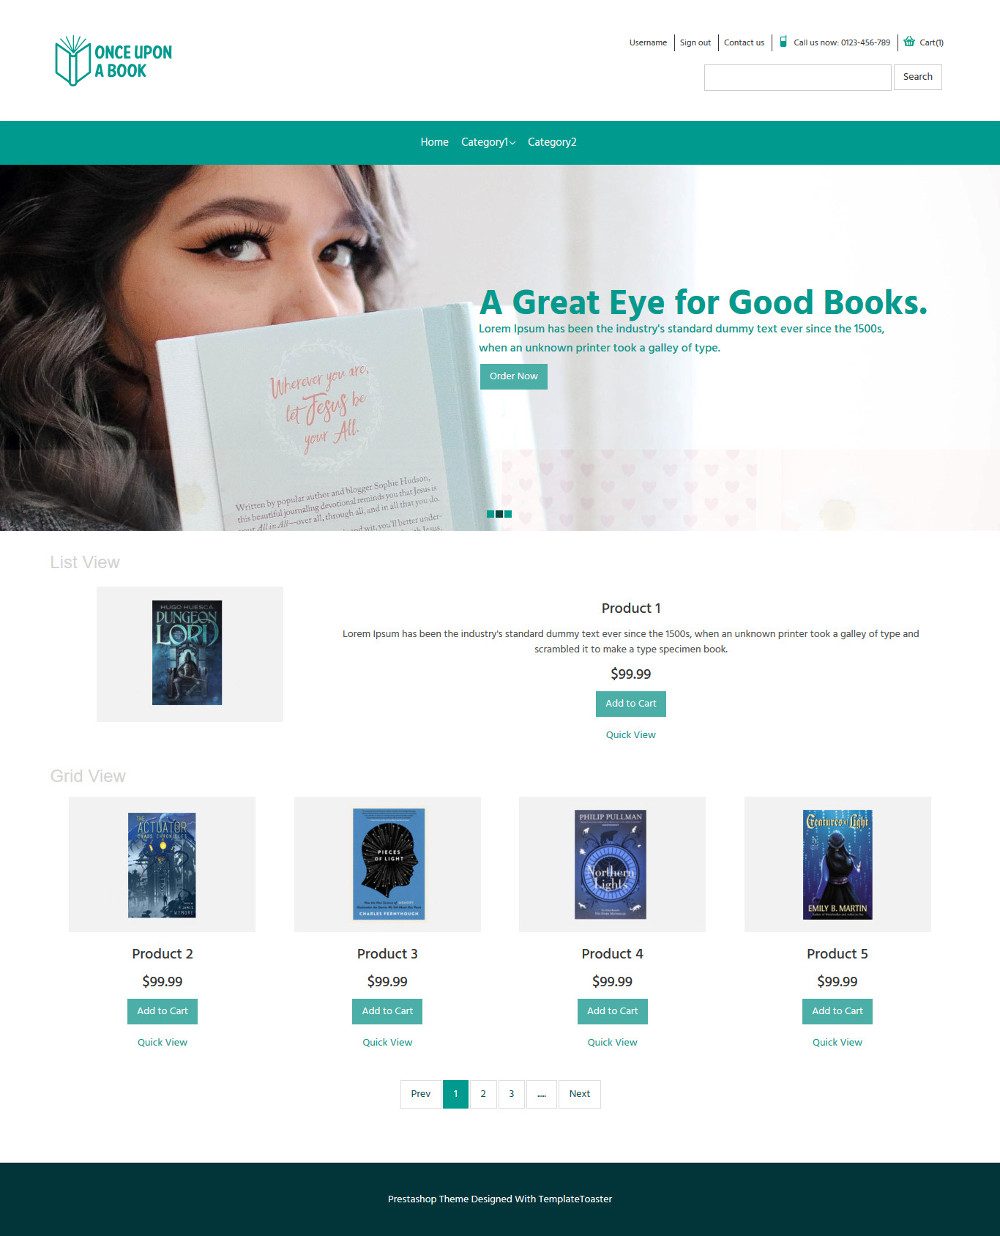 Once Upon a Book Online Book Store PrestaShop Theme